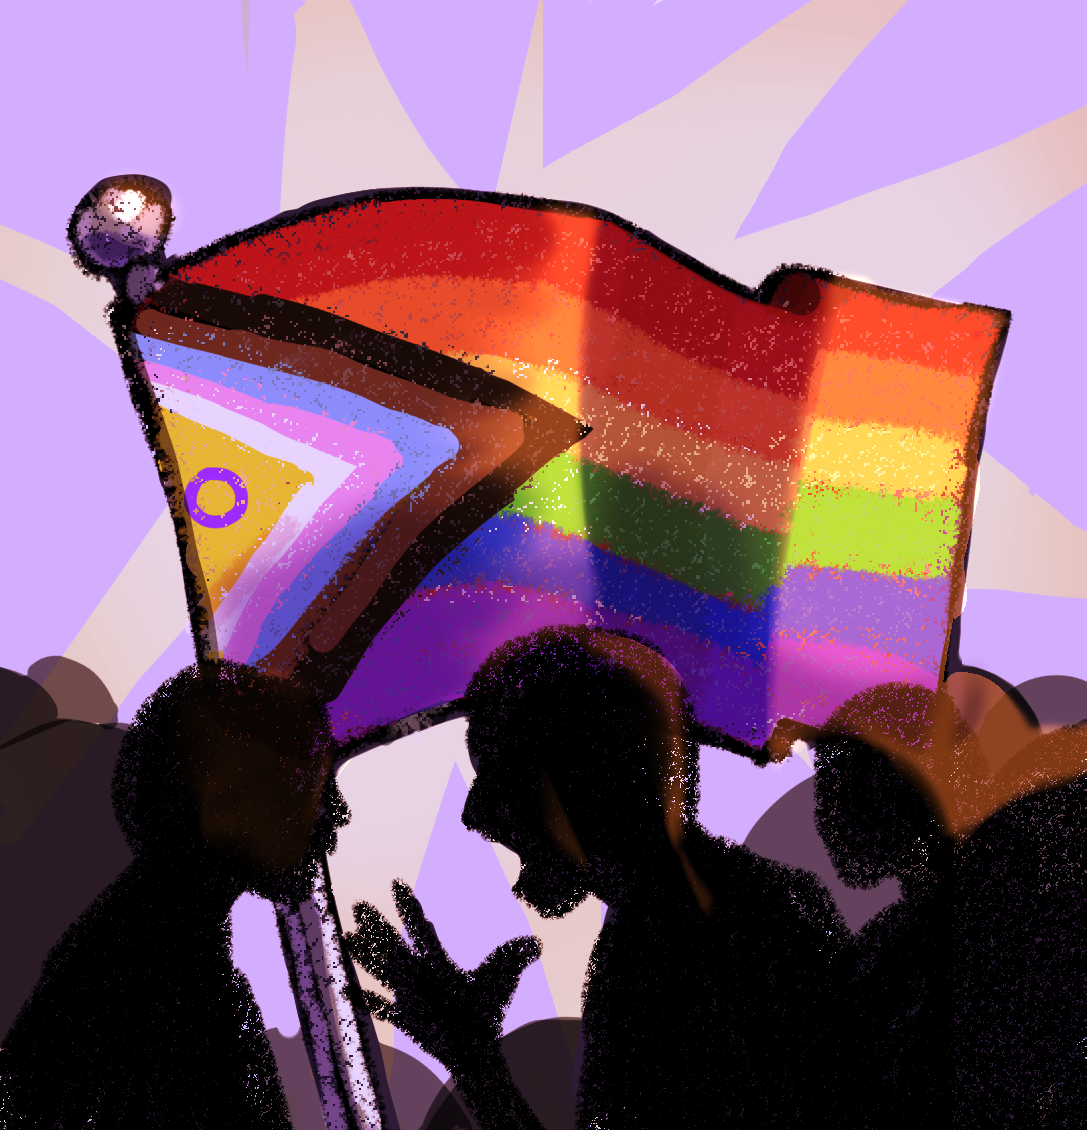 A digital illustration of two groups of silhouetted people. One group is silent and holds the Intersex-Inclusive Pride Progress Flag. The other group is led by an individual holding up their hand and shouting. The background is a light purple, and a light yellow starburst is behind the flag.